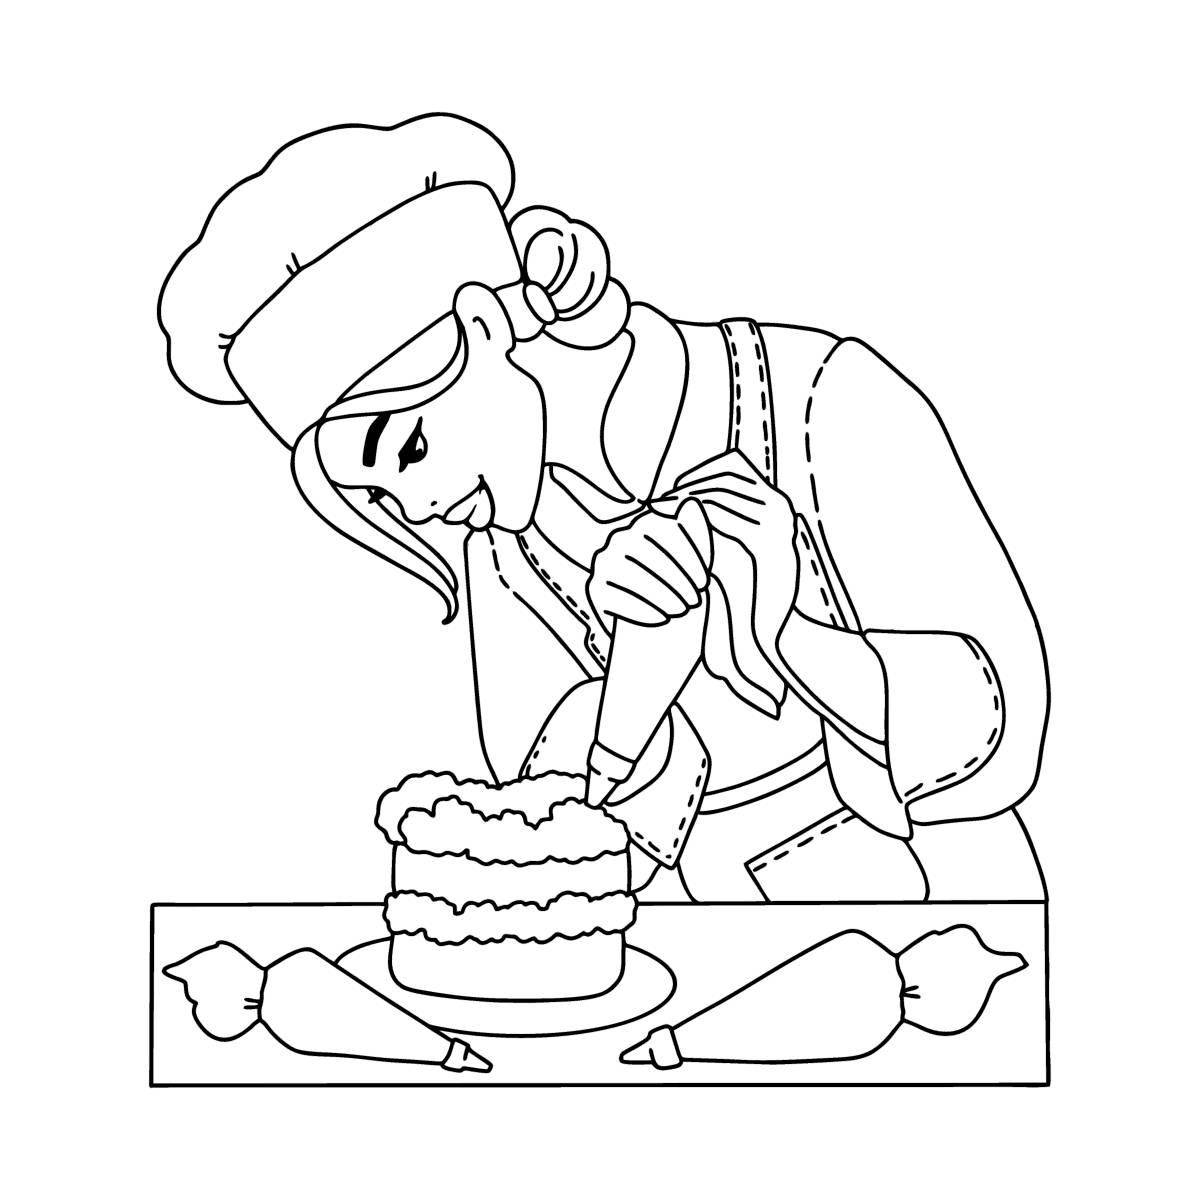 Playful pastry chef coloring page